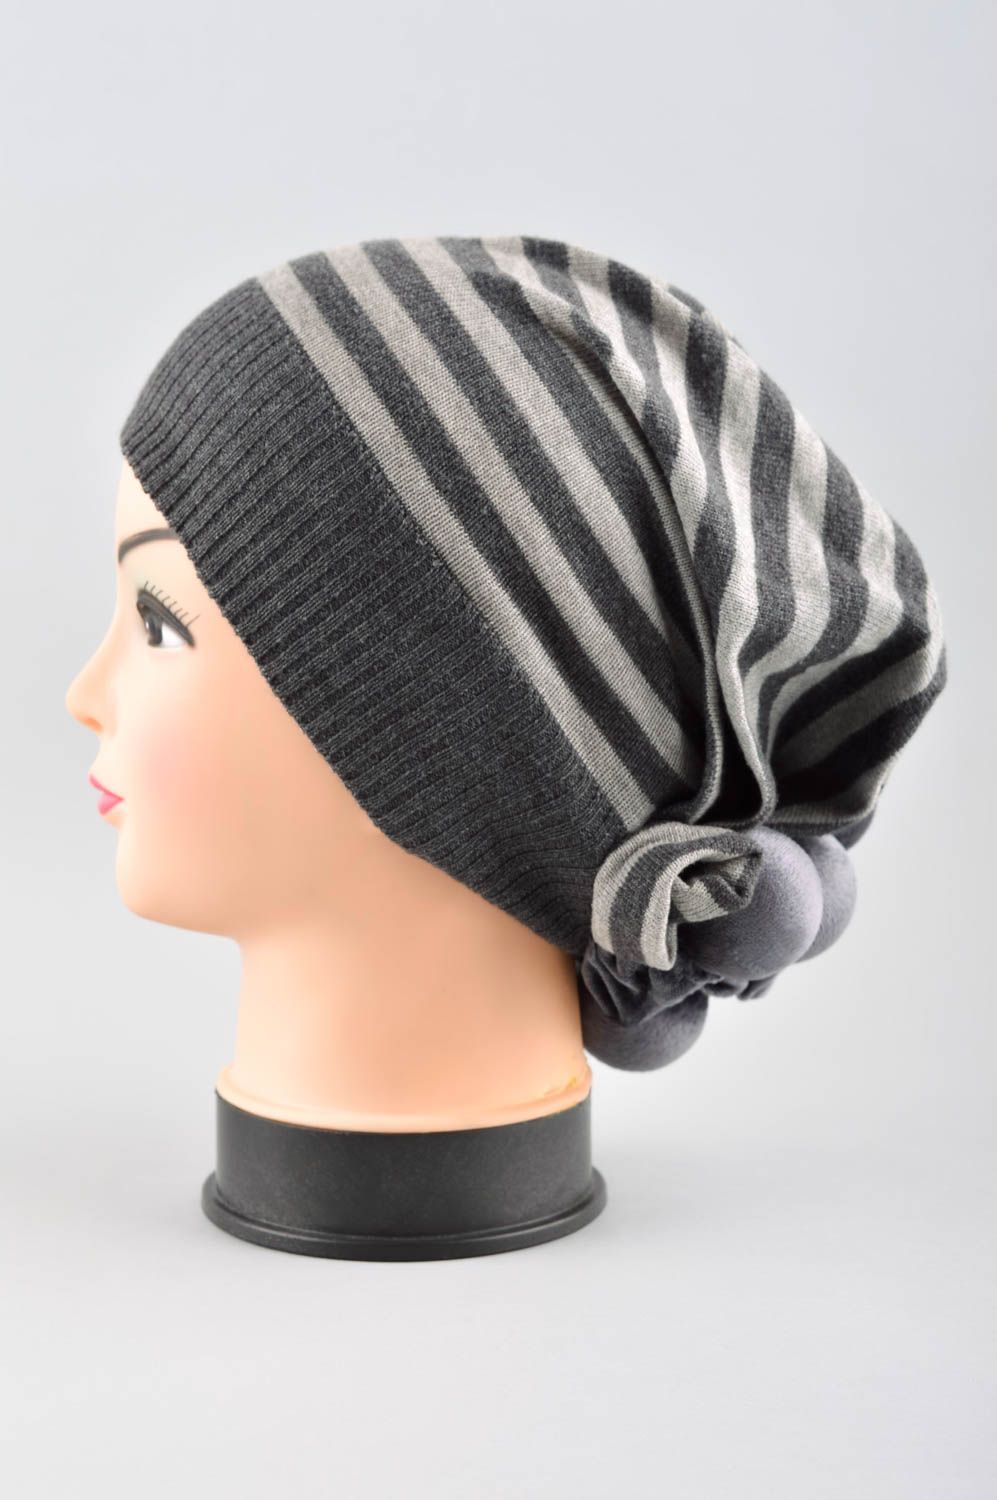 Striped handmade hat womens mittens fashion accessories winter outfits photo 3